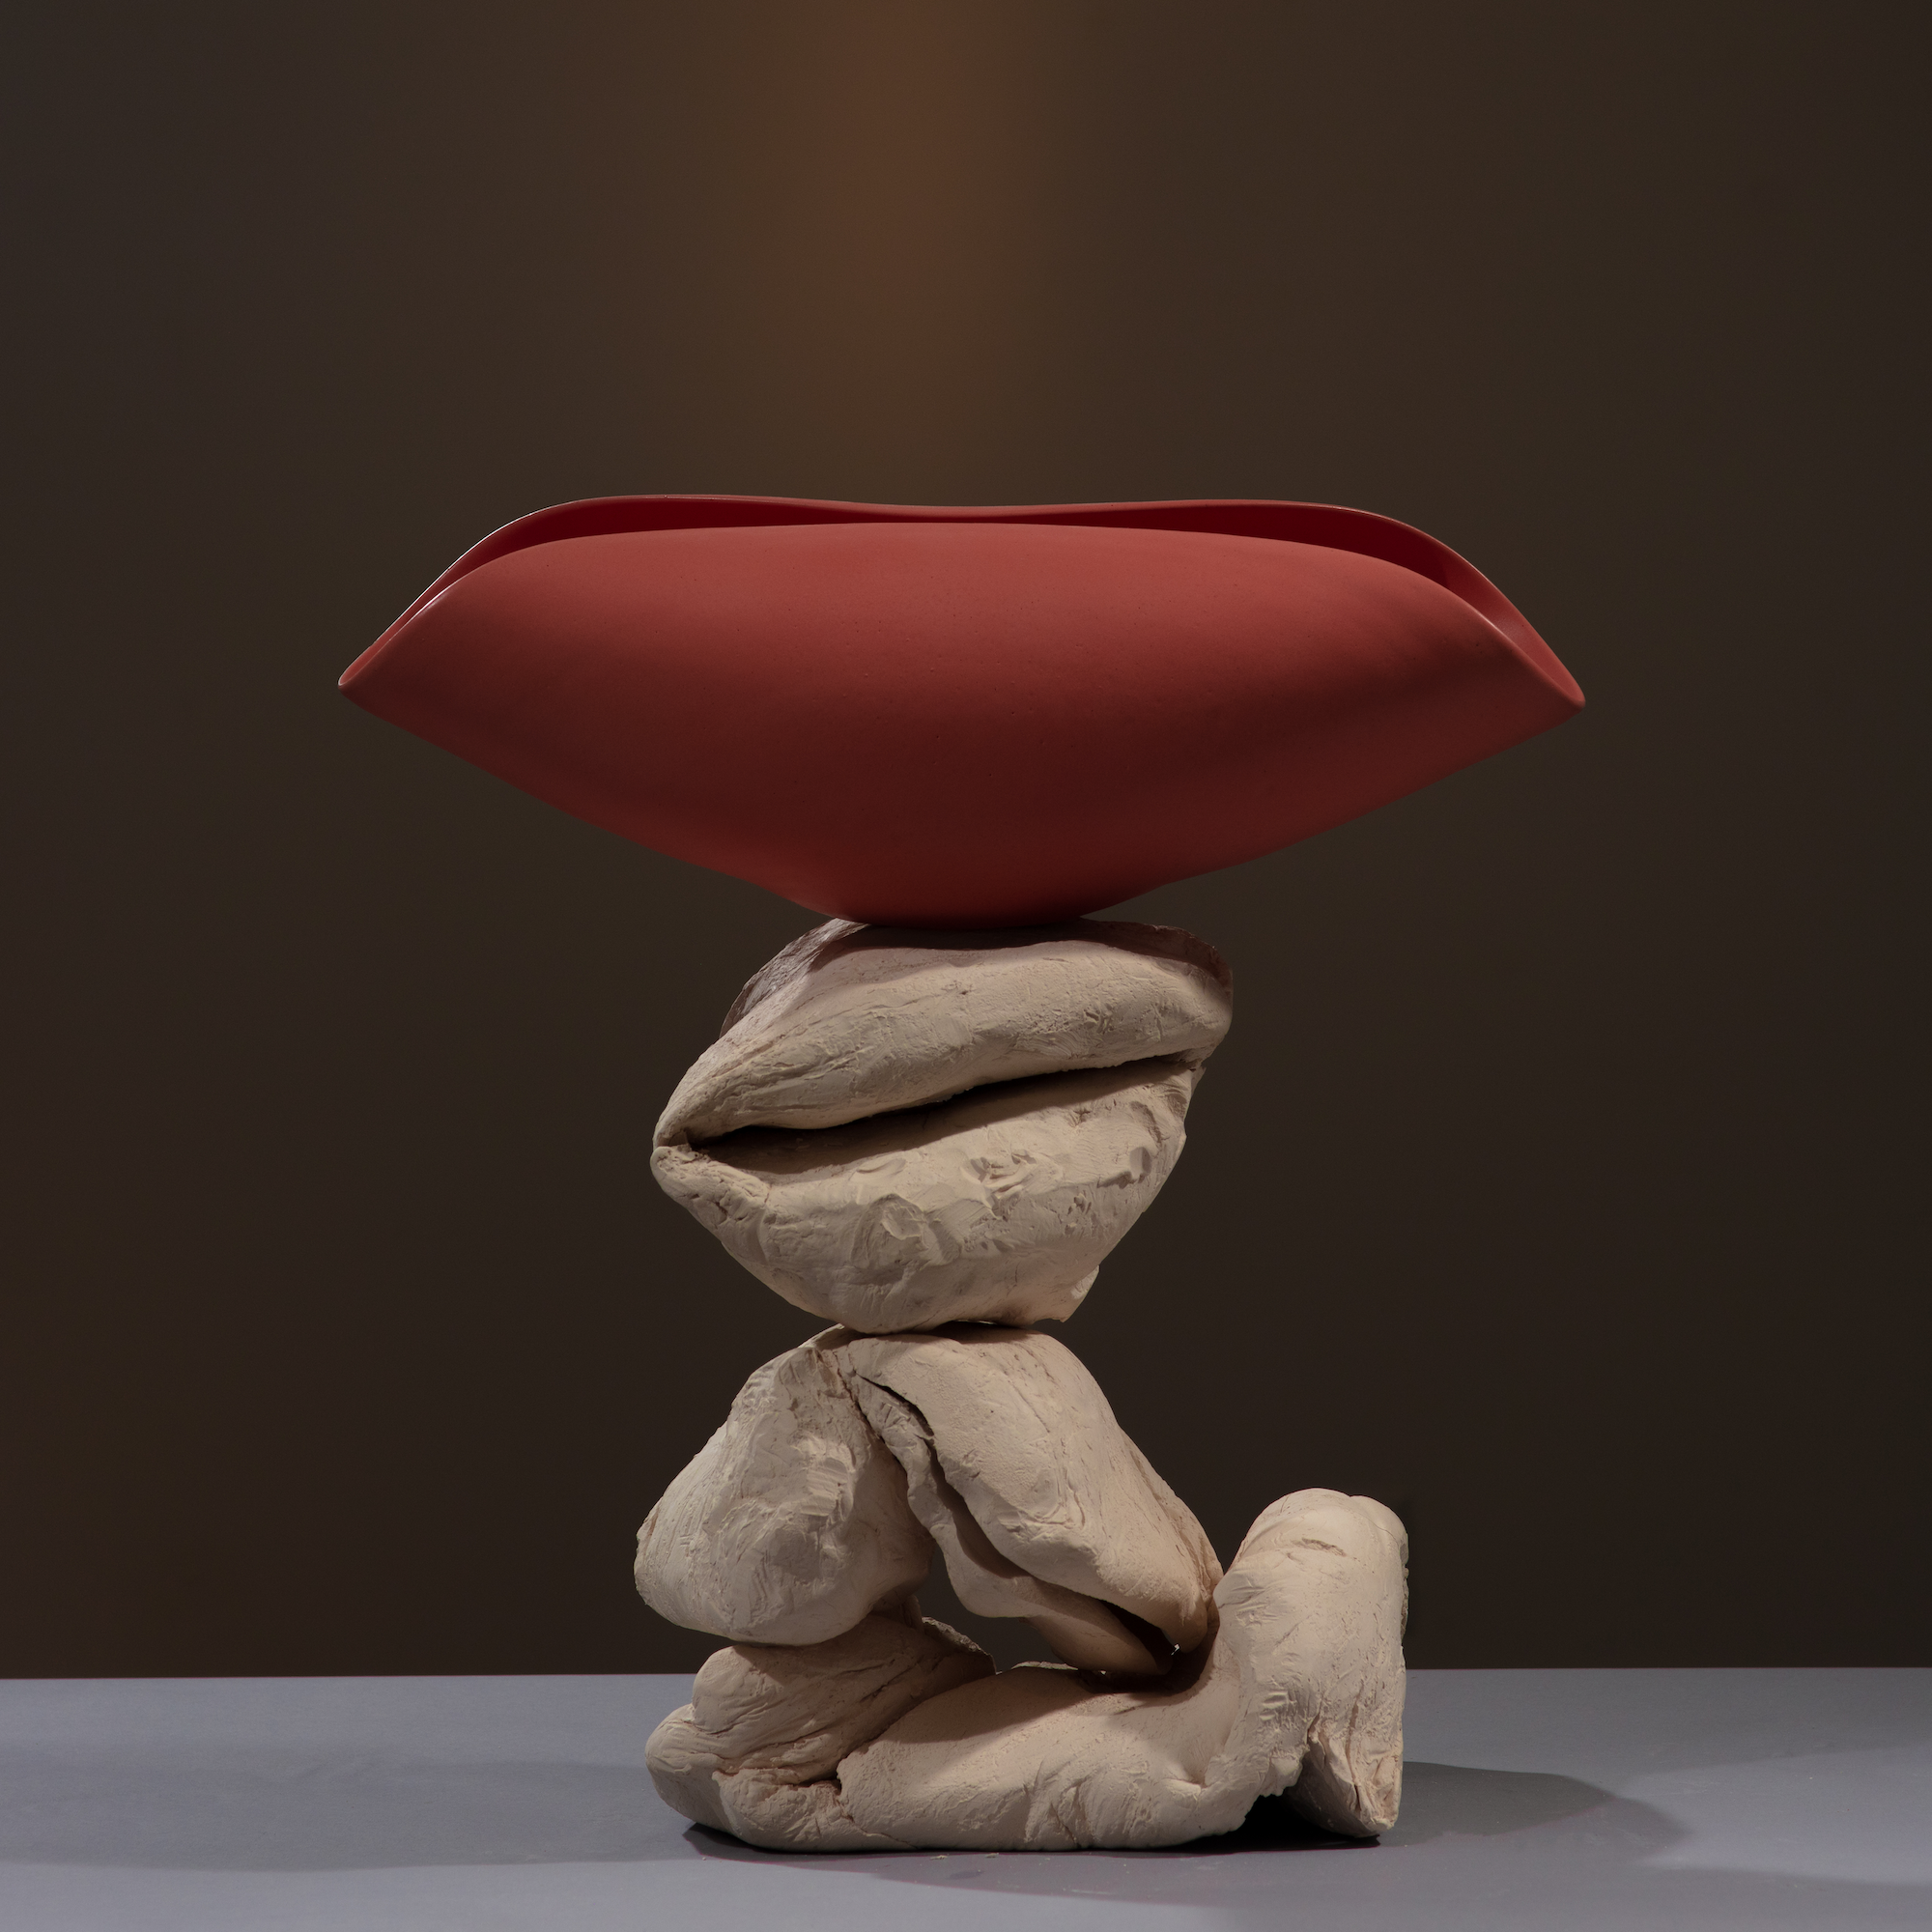 stacked hunks of unfired kneaded clay with a matte red glazed folded bowl shaped vessel balanced on top, arranged on a black fabric backdrop